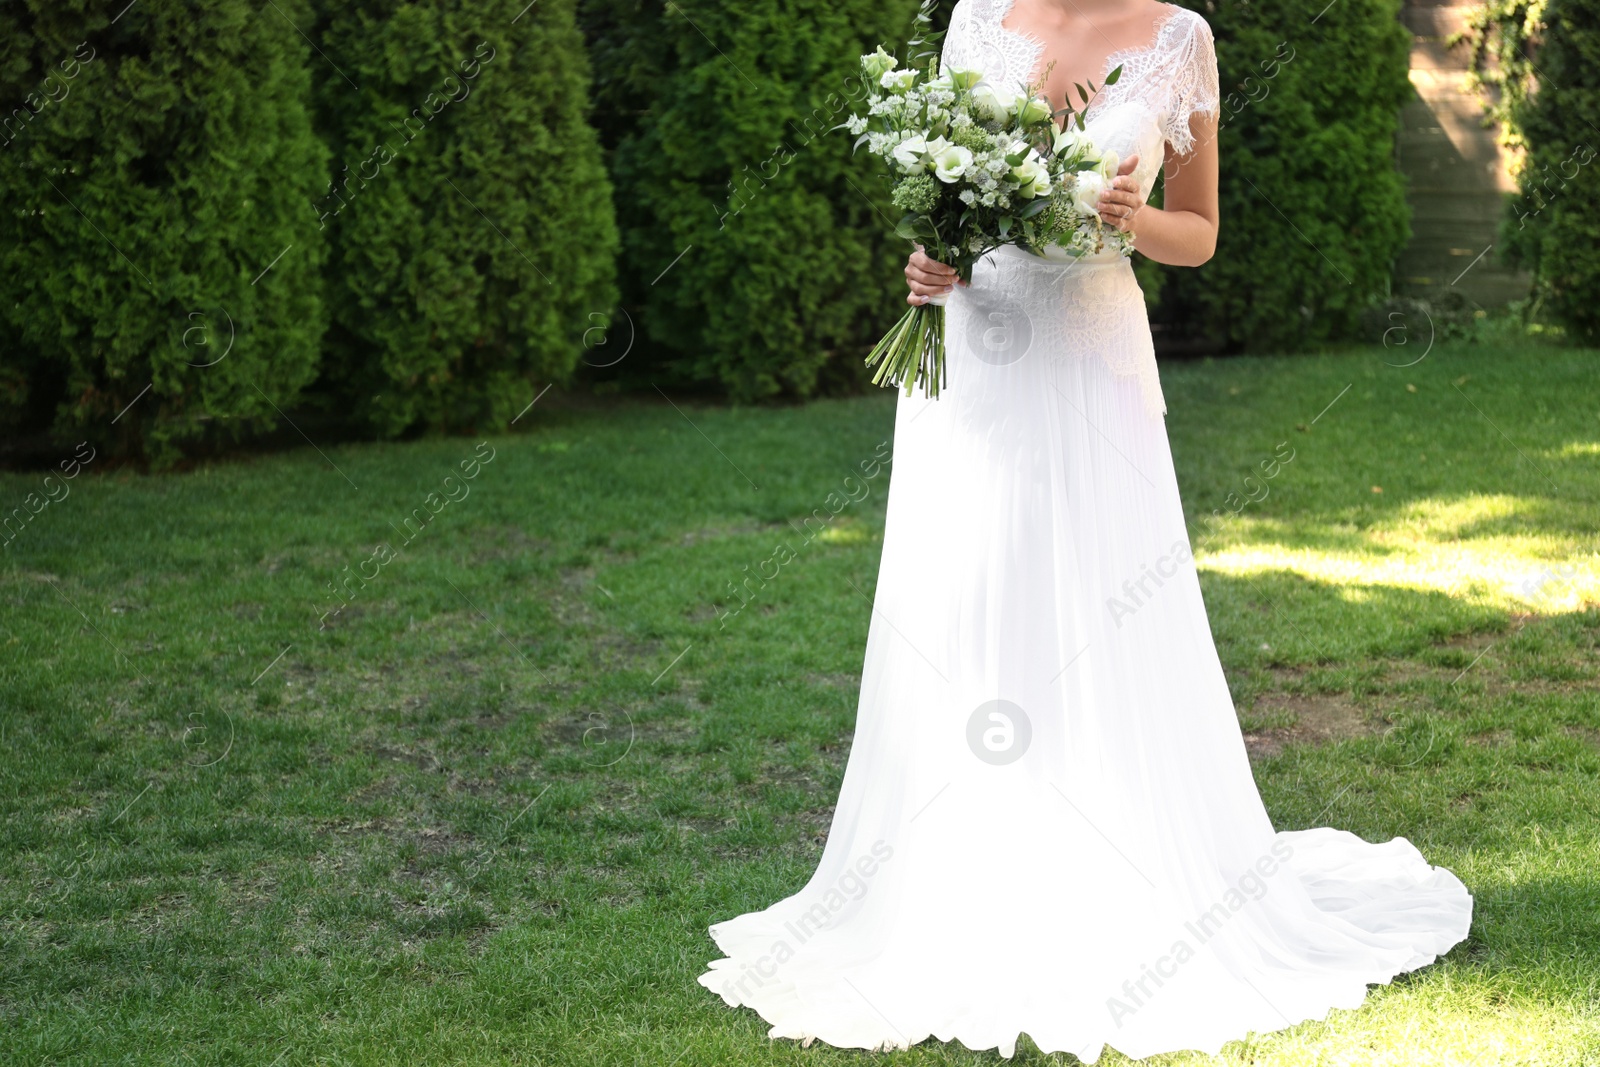 Photo of Bride in beautiful wedding dress with bouquet outdoors, closeup. Space for text